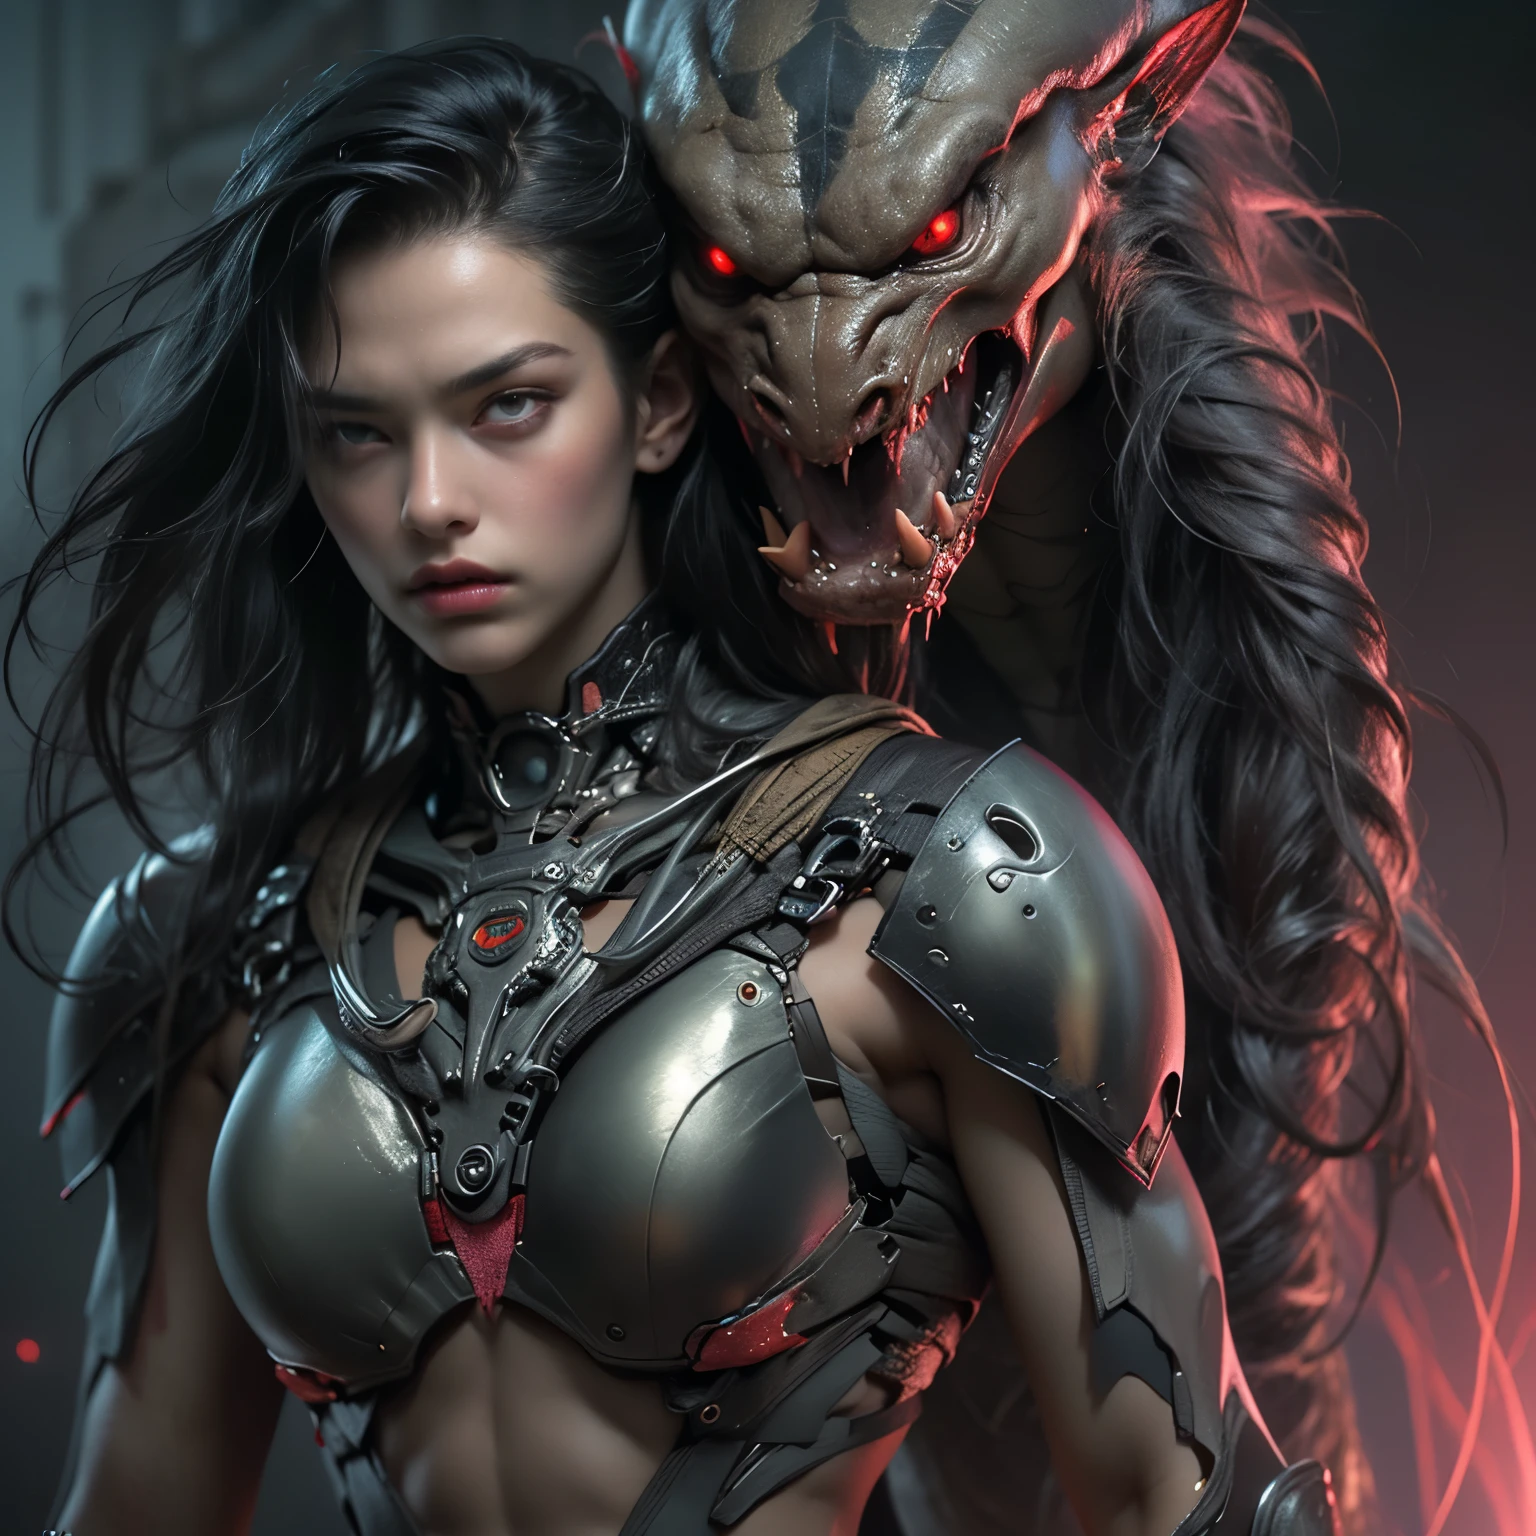 1 female alien, The predator, (extremely beautiful:1.2), (intense gaze:1.4), (predator:1.1), long dark claws, (NSFW:1), nipples, thick eyebrows, (She has shining pink eyes:1.2), the most beautiful face in the universe, jet black hair, symmetrical beautiful eyes, hyper detailed eyes,

A woman predator with an extremely beautiful face, her intense gaze fixed on her prey, a primal force that could not be denied.

(beautiful lean body:1.5), (muscular build:1.2), (prowling:1.3), (sleek movements:1.4)

Her beautiful body, muscular and toned, moved with sleek grace as she prowled, ready to strike at a moment's notice. The predator within her was always on,                                                                          
                                                                                                                                                               
 cinematic drawing of characters, ultra high quality model, cinematic quality, detail up, (Intricate details:1.2), High resolution, High Definition, drawing faithfully, Official art, Unity 8K wall , 8K Portrait, Best Quality, Very High resolution, ultra detailed artistic photography,